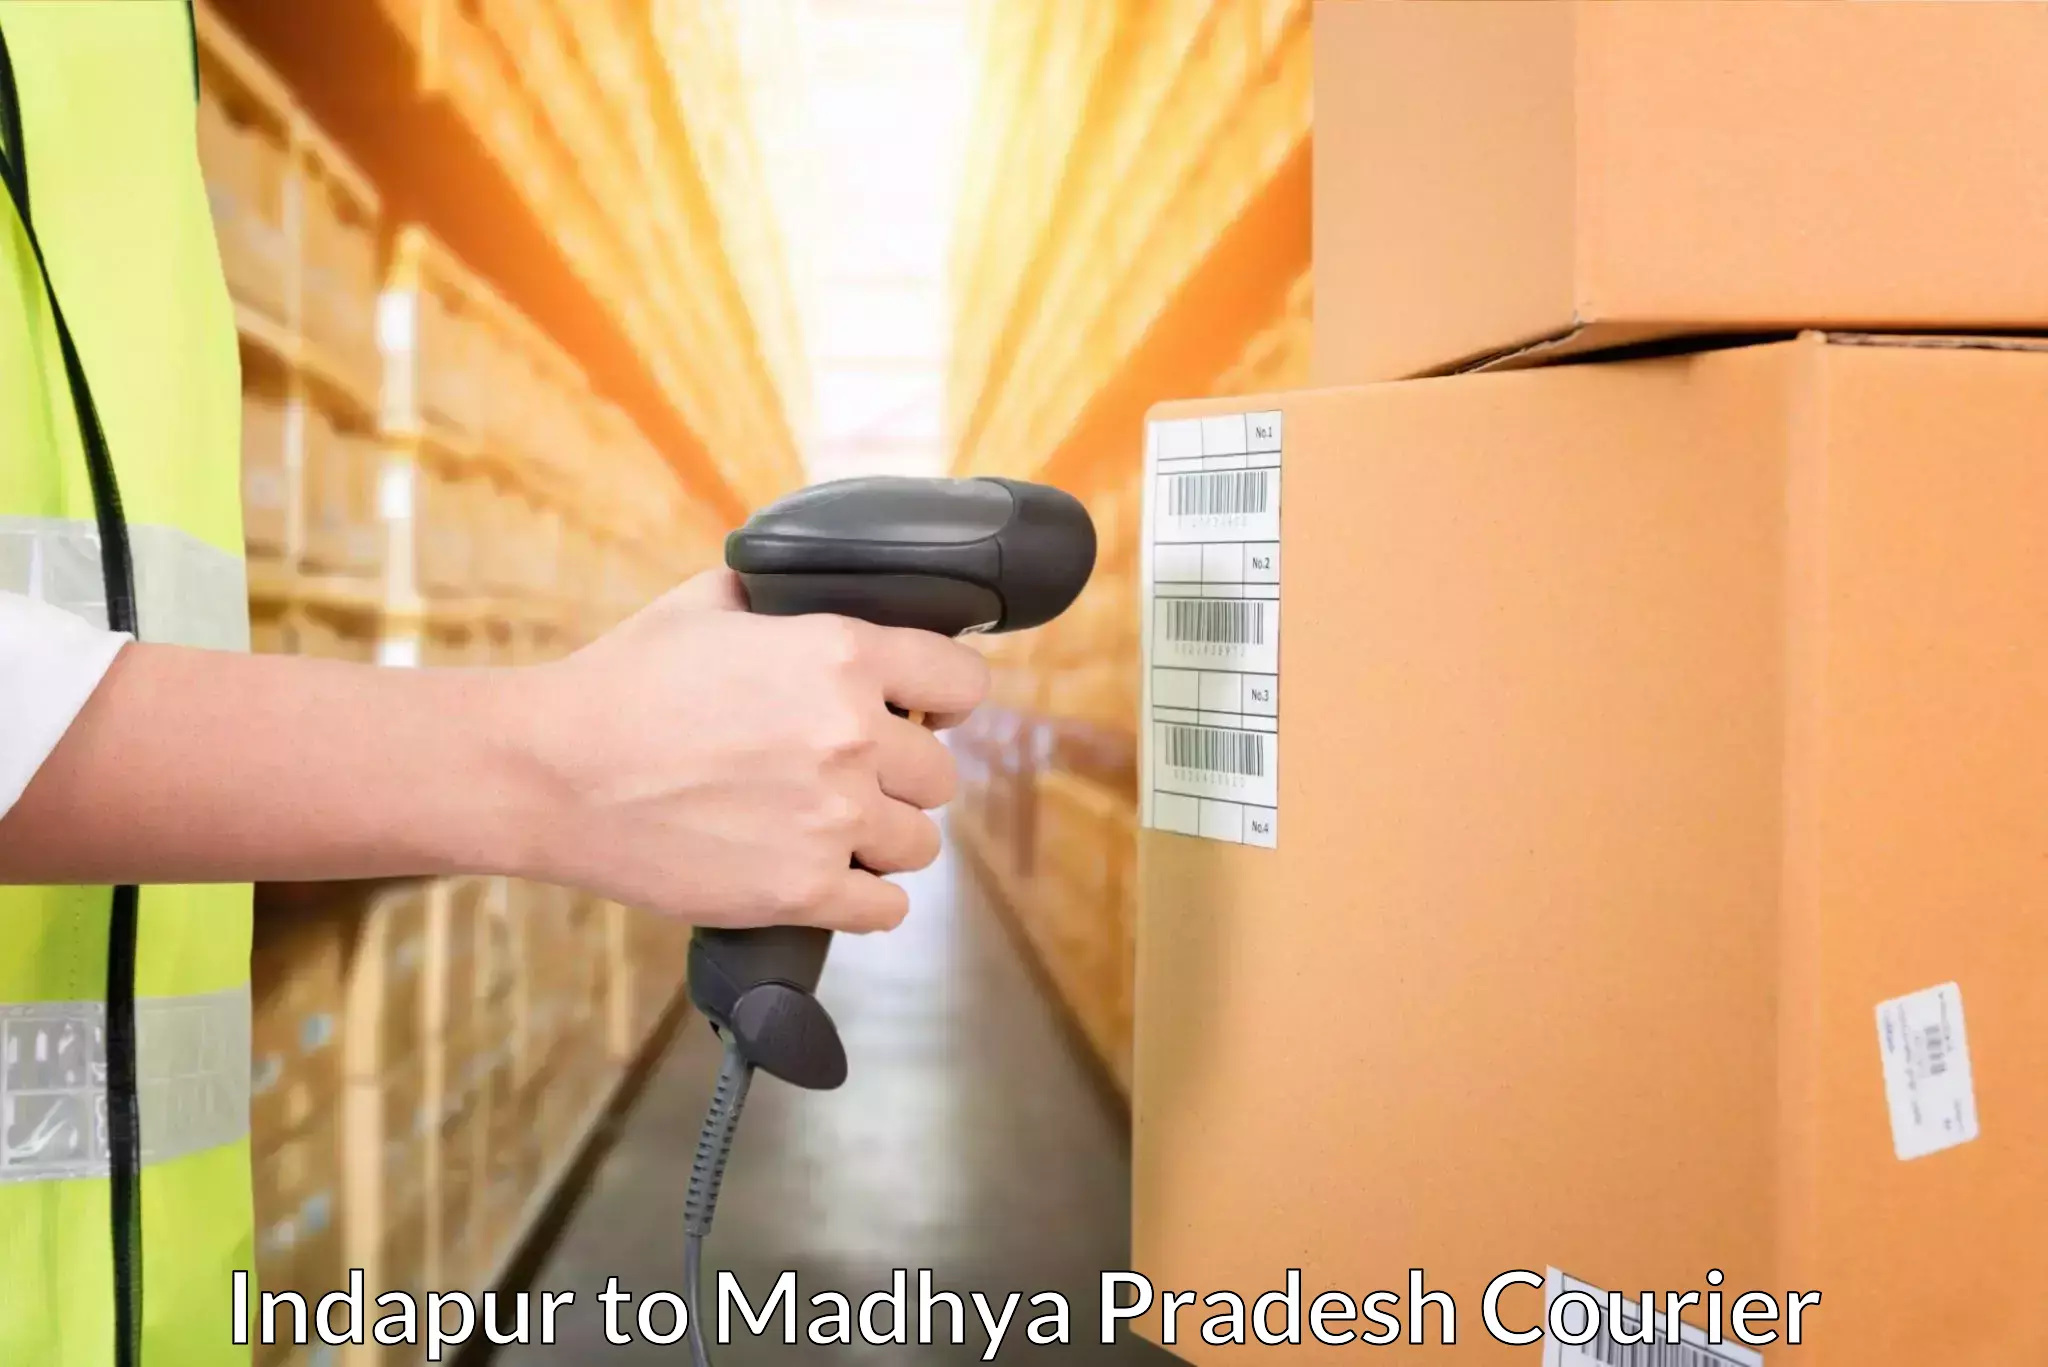 On-call courier service in Indapur to Vidisha